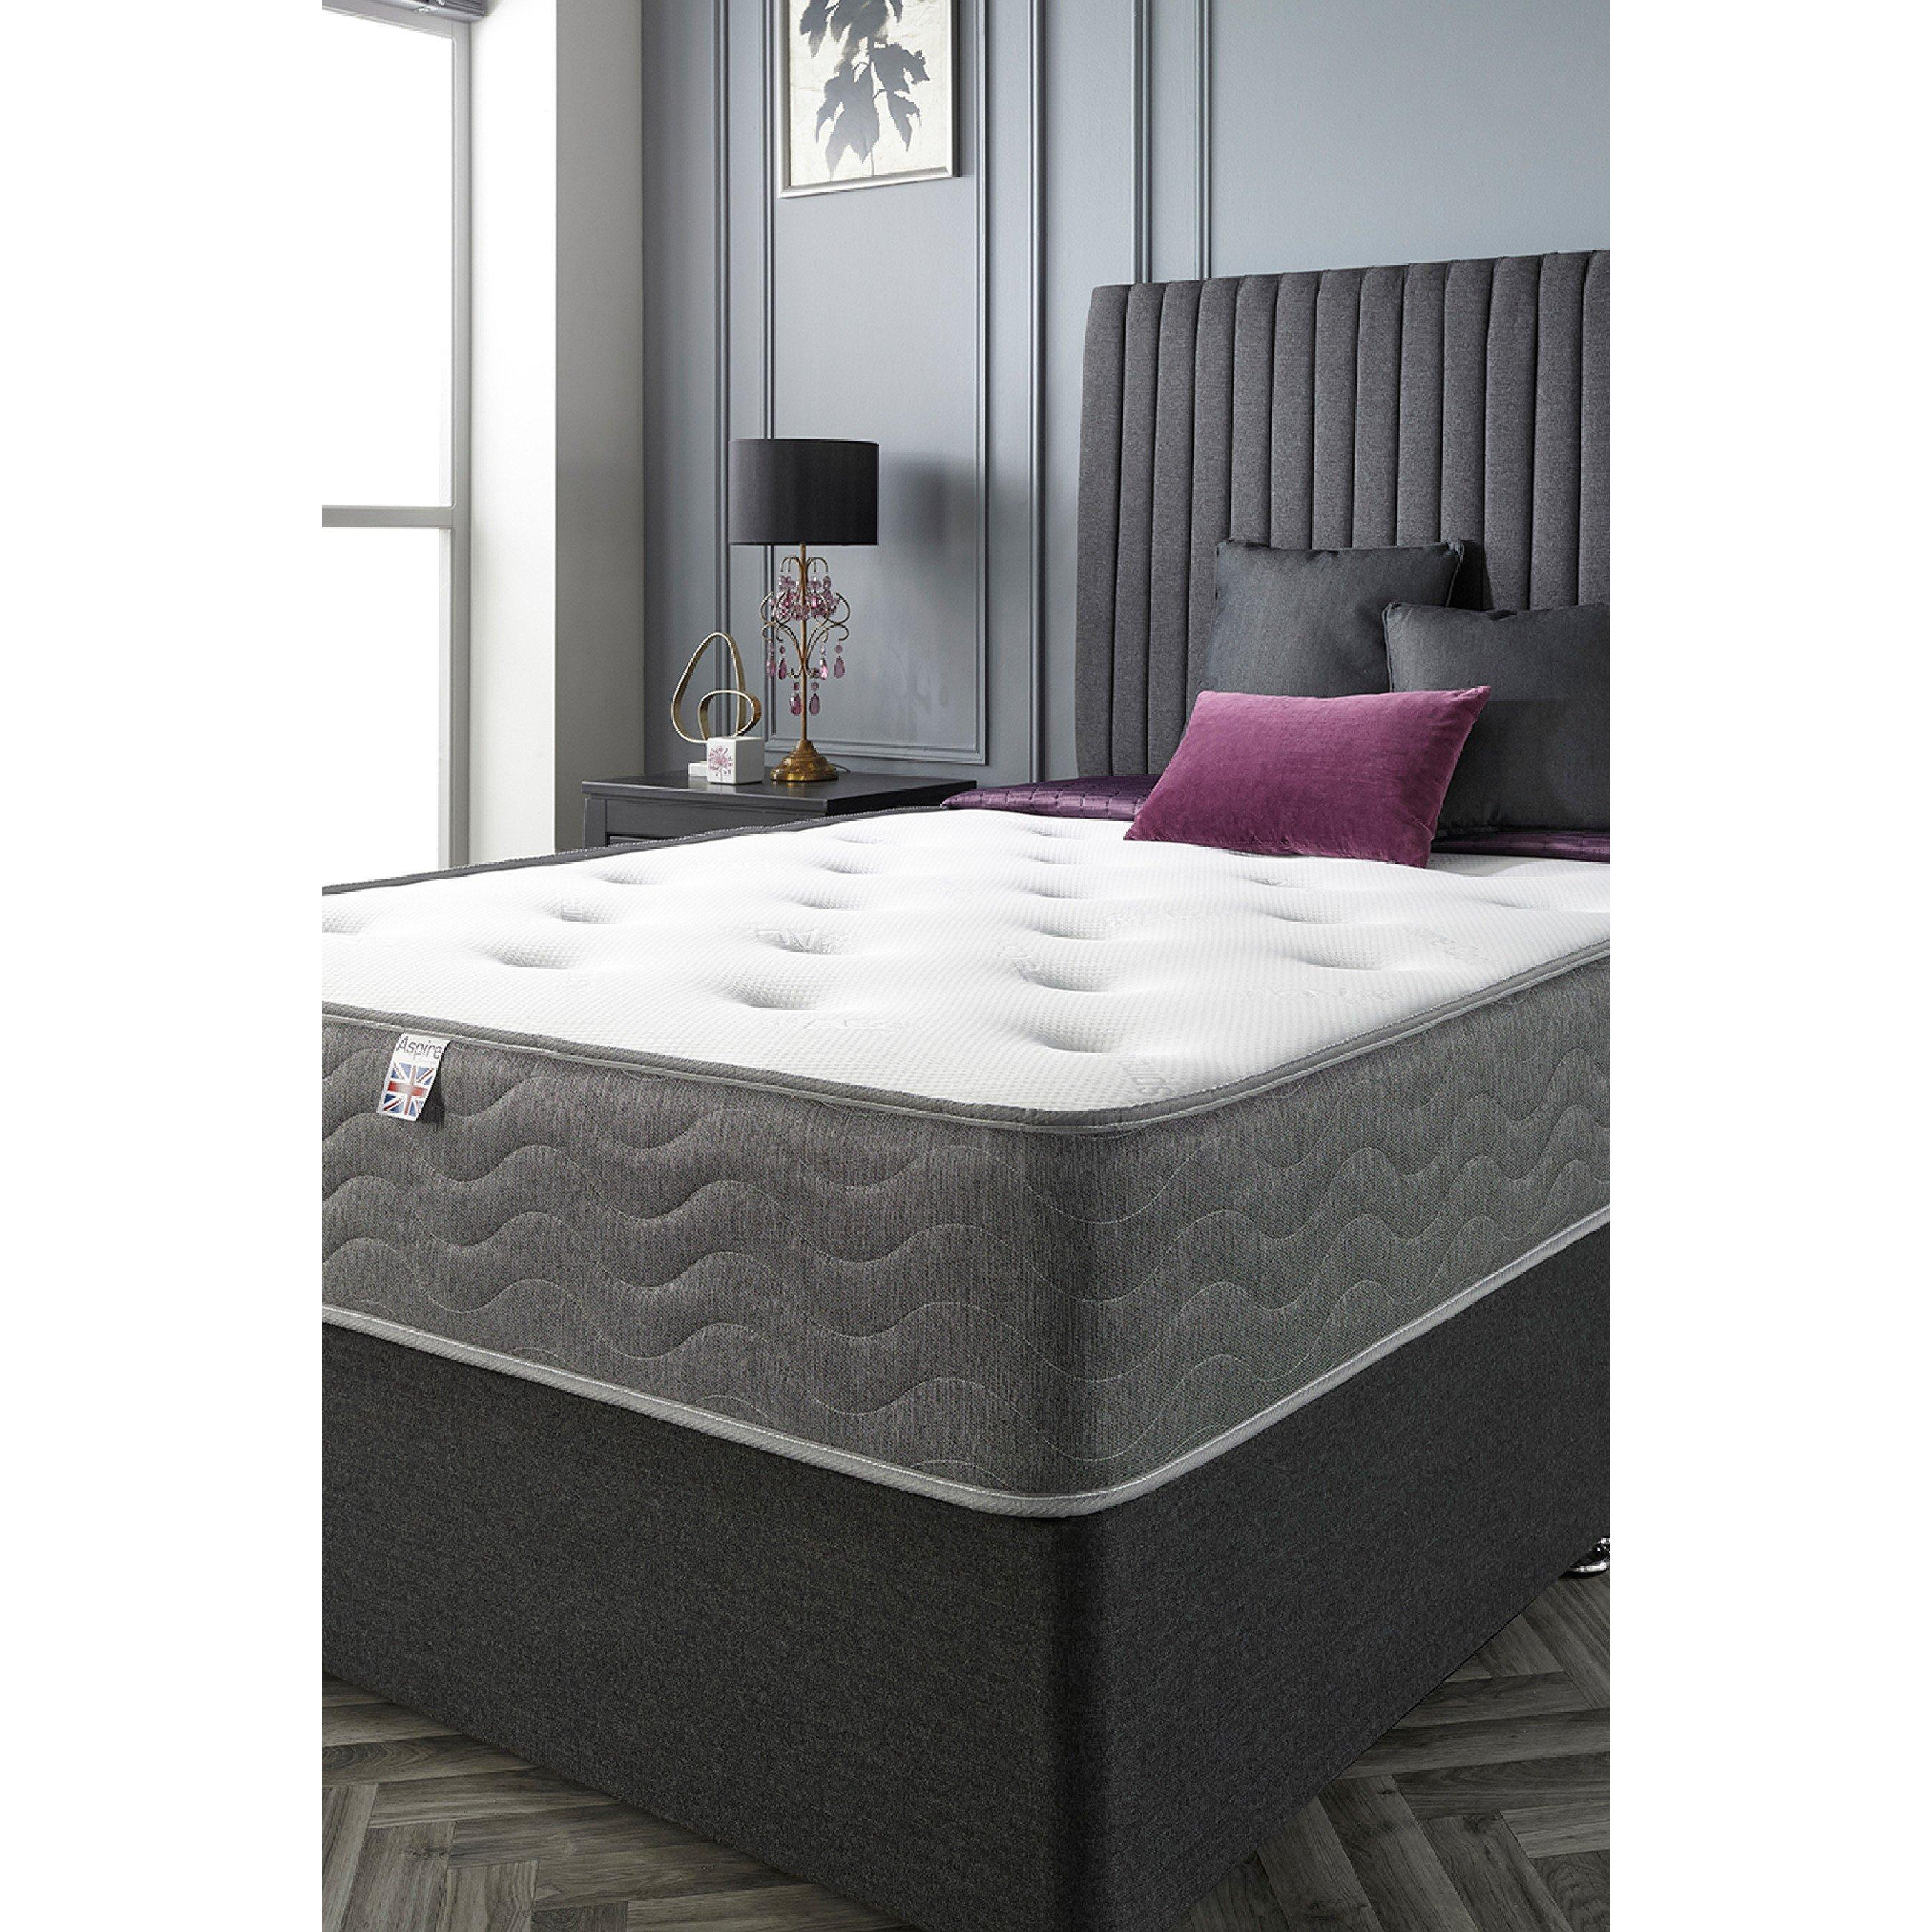 Cool Tufted Ortho Mattress - image 1